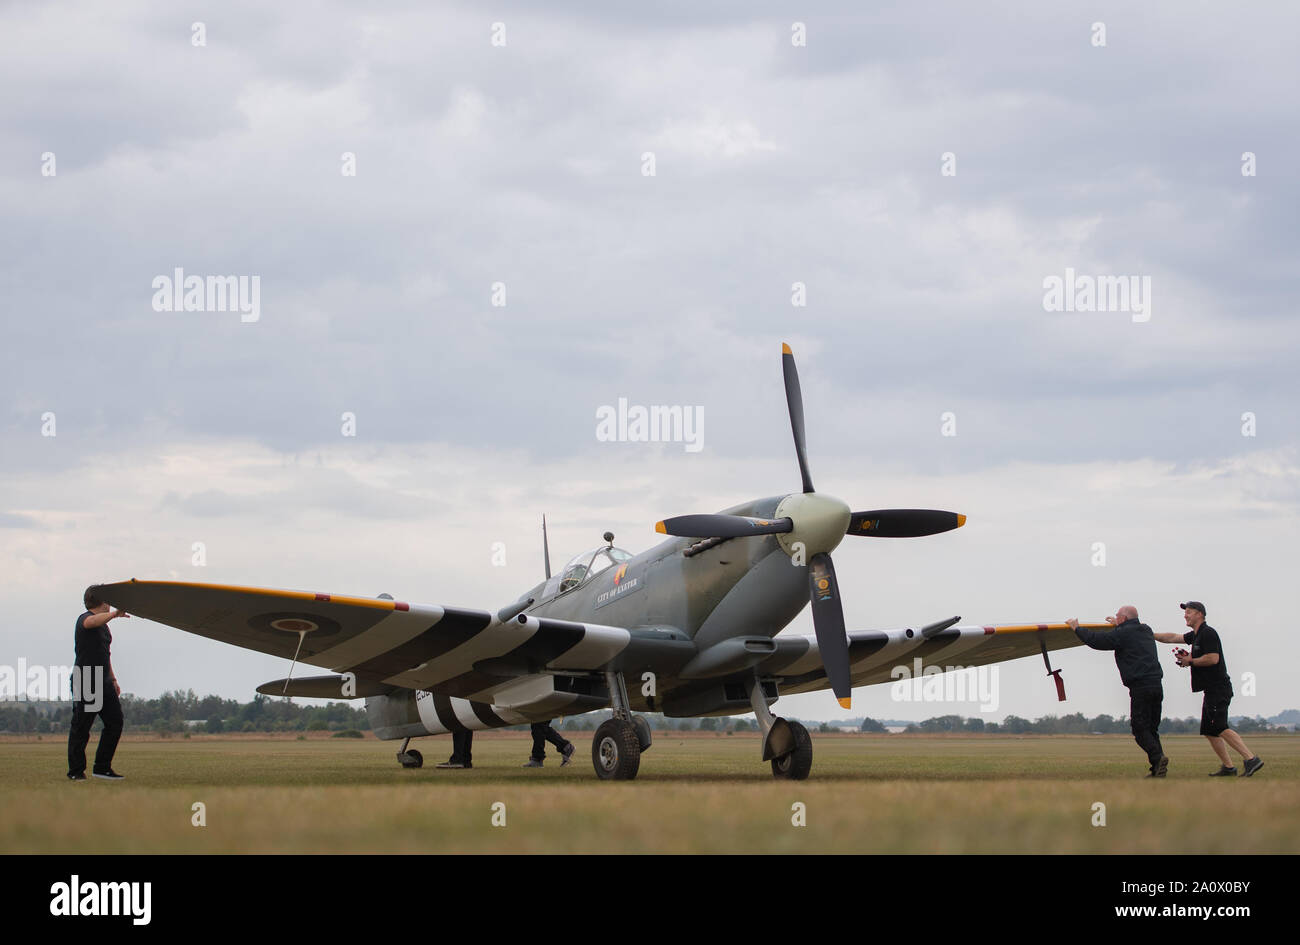 A Supermarine Spitfire is manoeuvred onto the flightline during the Duxford Battle of Britain Air Show at the Imperial War Museum in Duxford, Cambridgeshire. Stock Photo